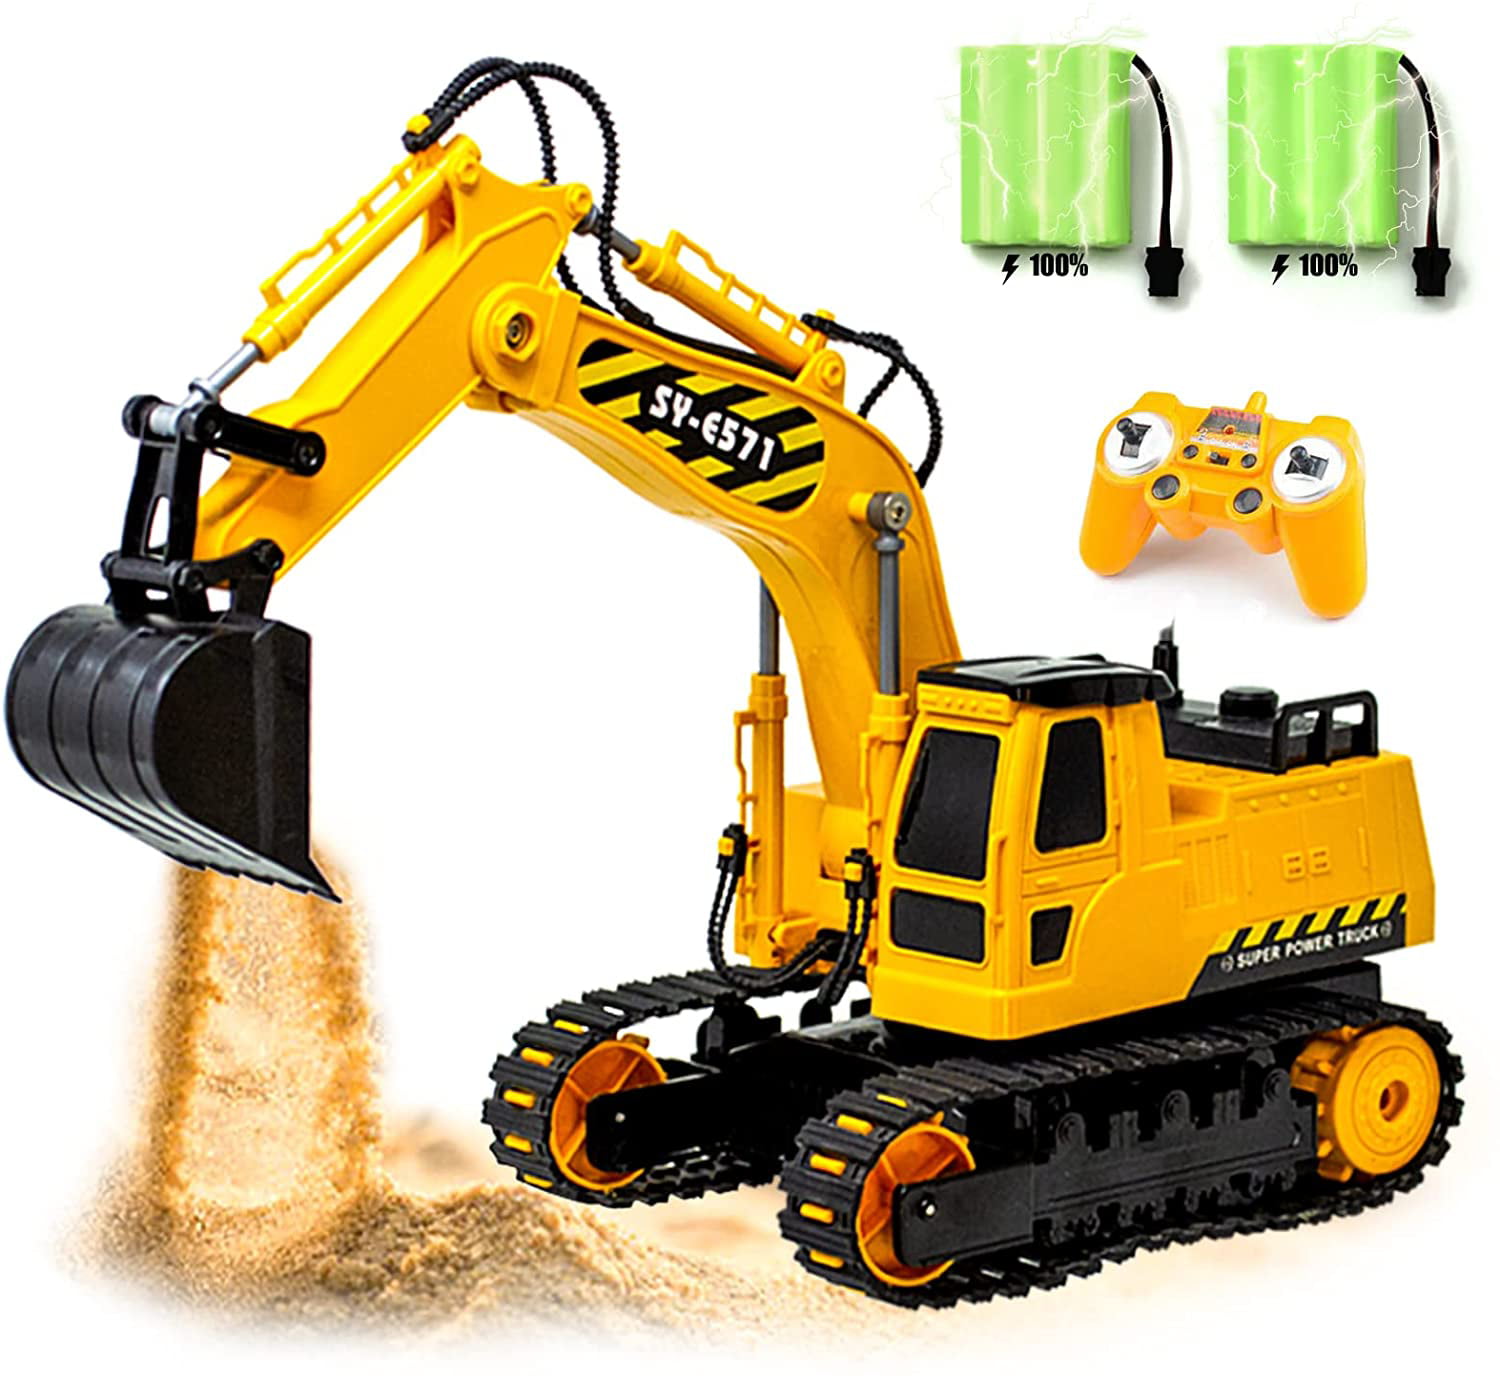 DIY Assembled Hydraulic Excavator Building Projects for Kids and Teens Hobby 